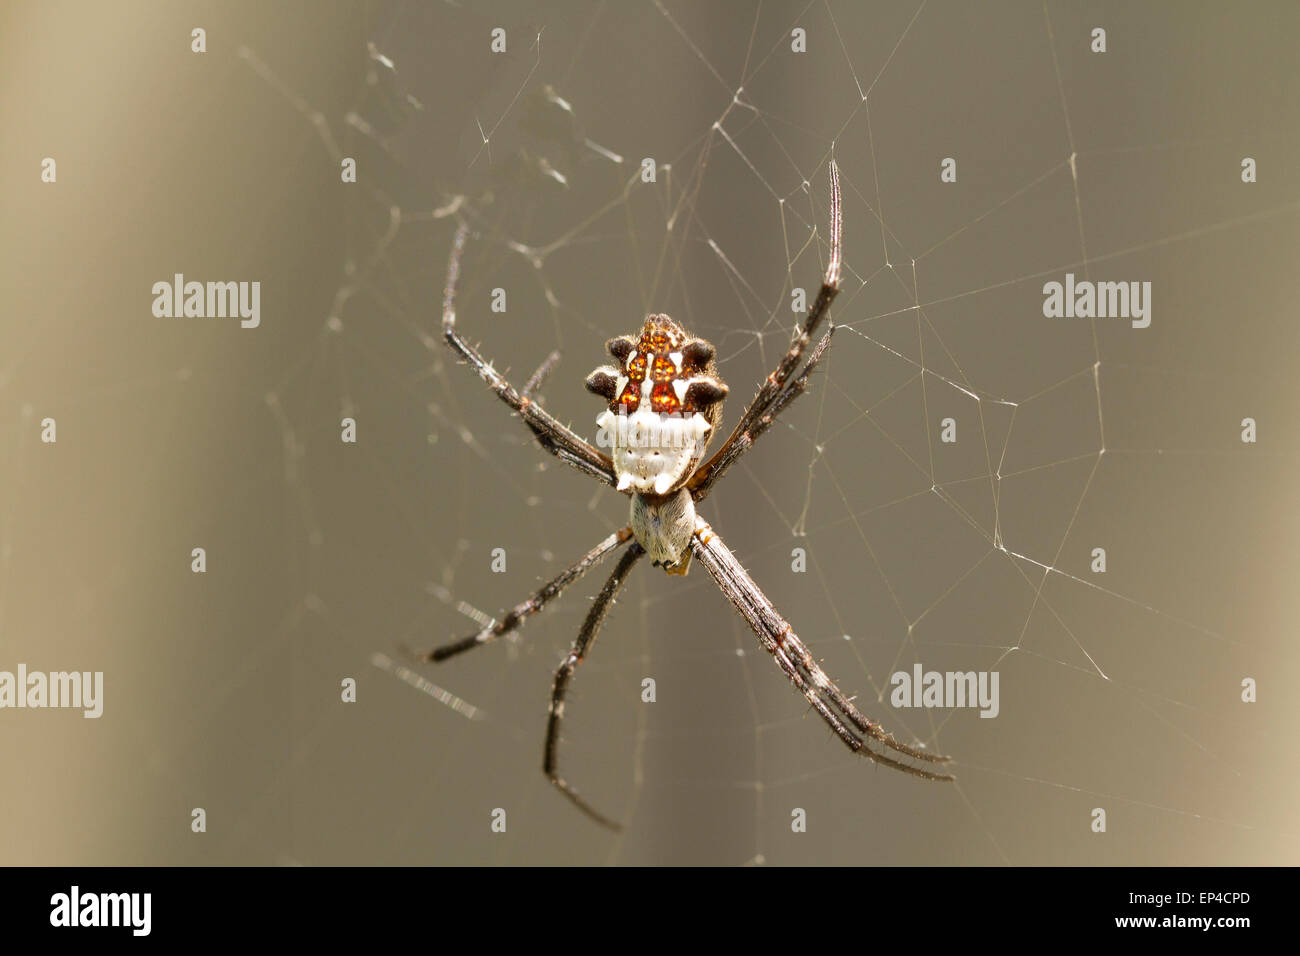 Silver Backed spider in web waiting for insects to be caught Stock Photo